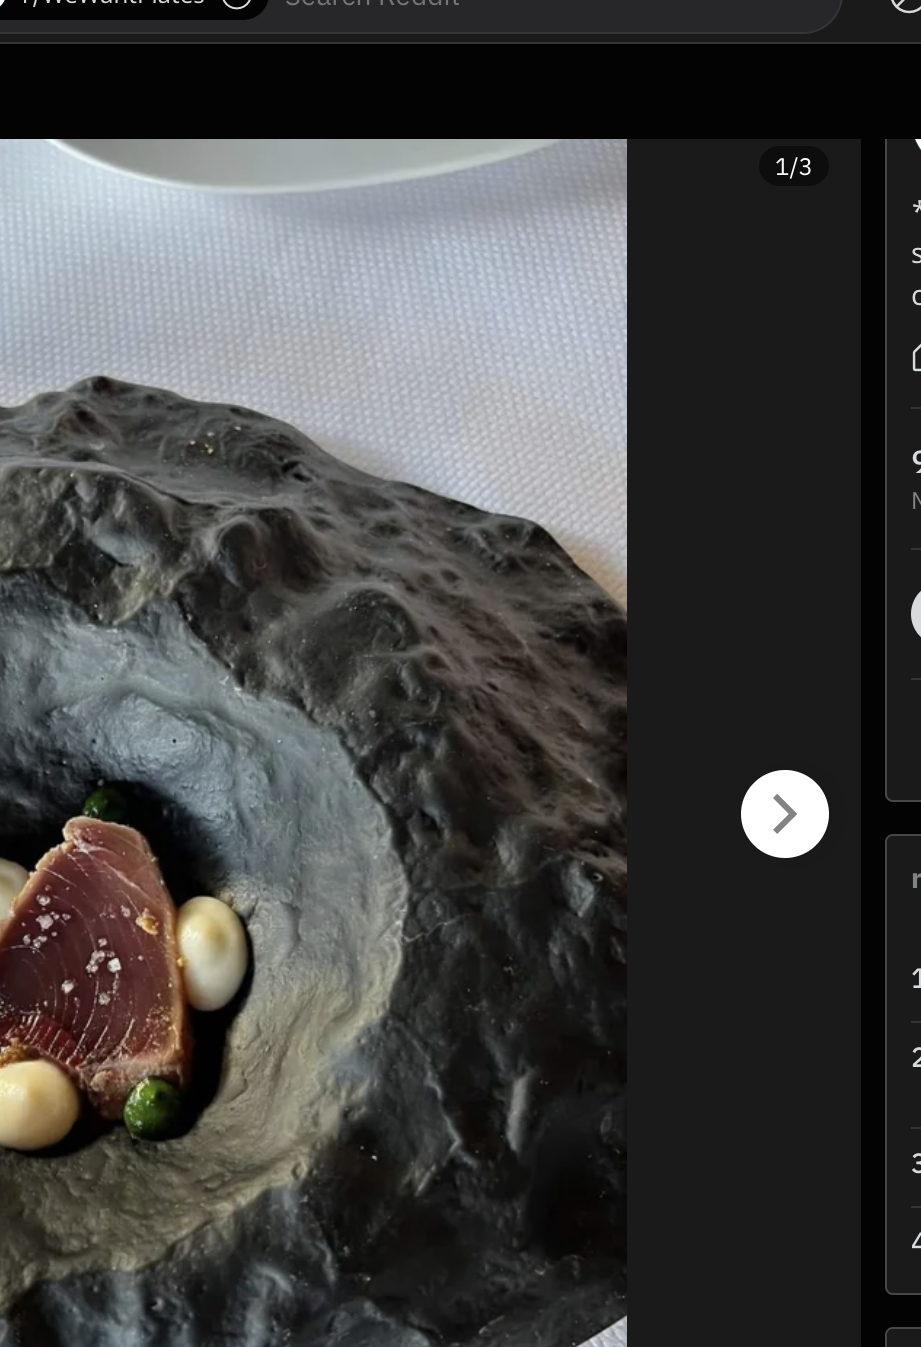 A piece of fish is served in this molten rock-like bowl